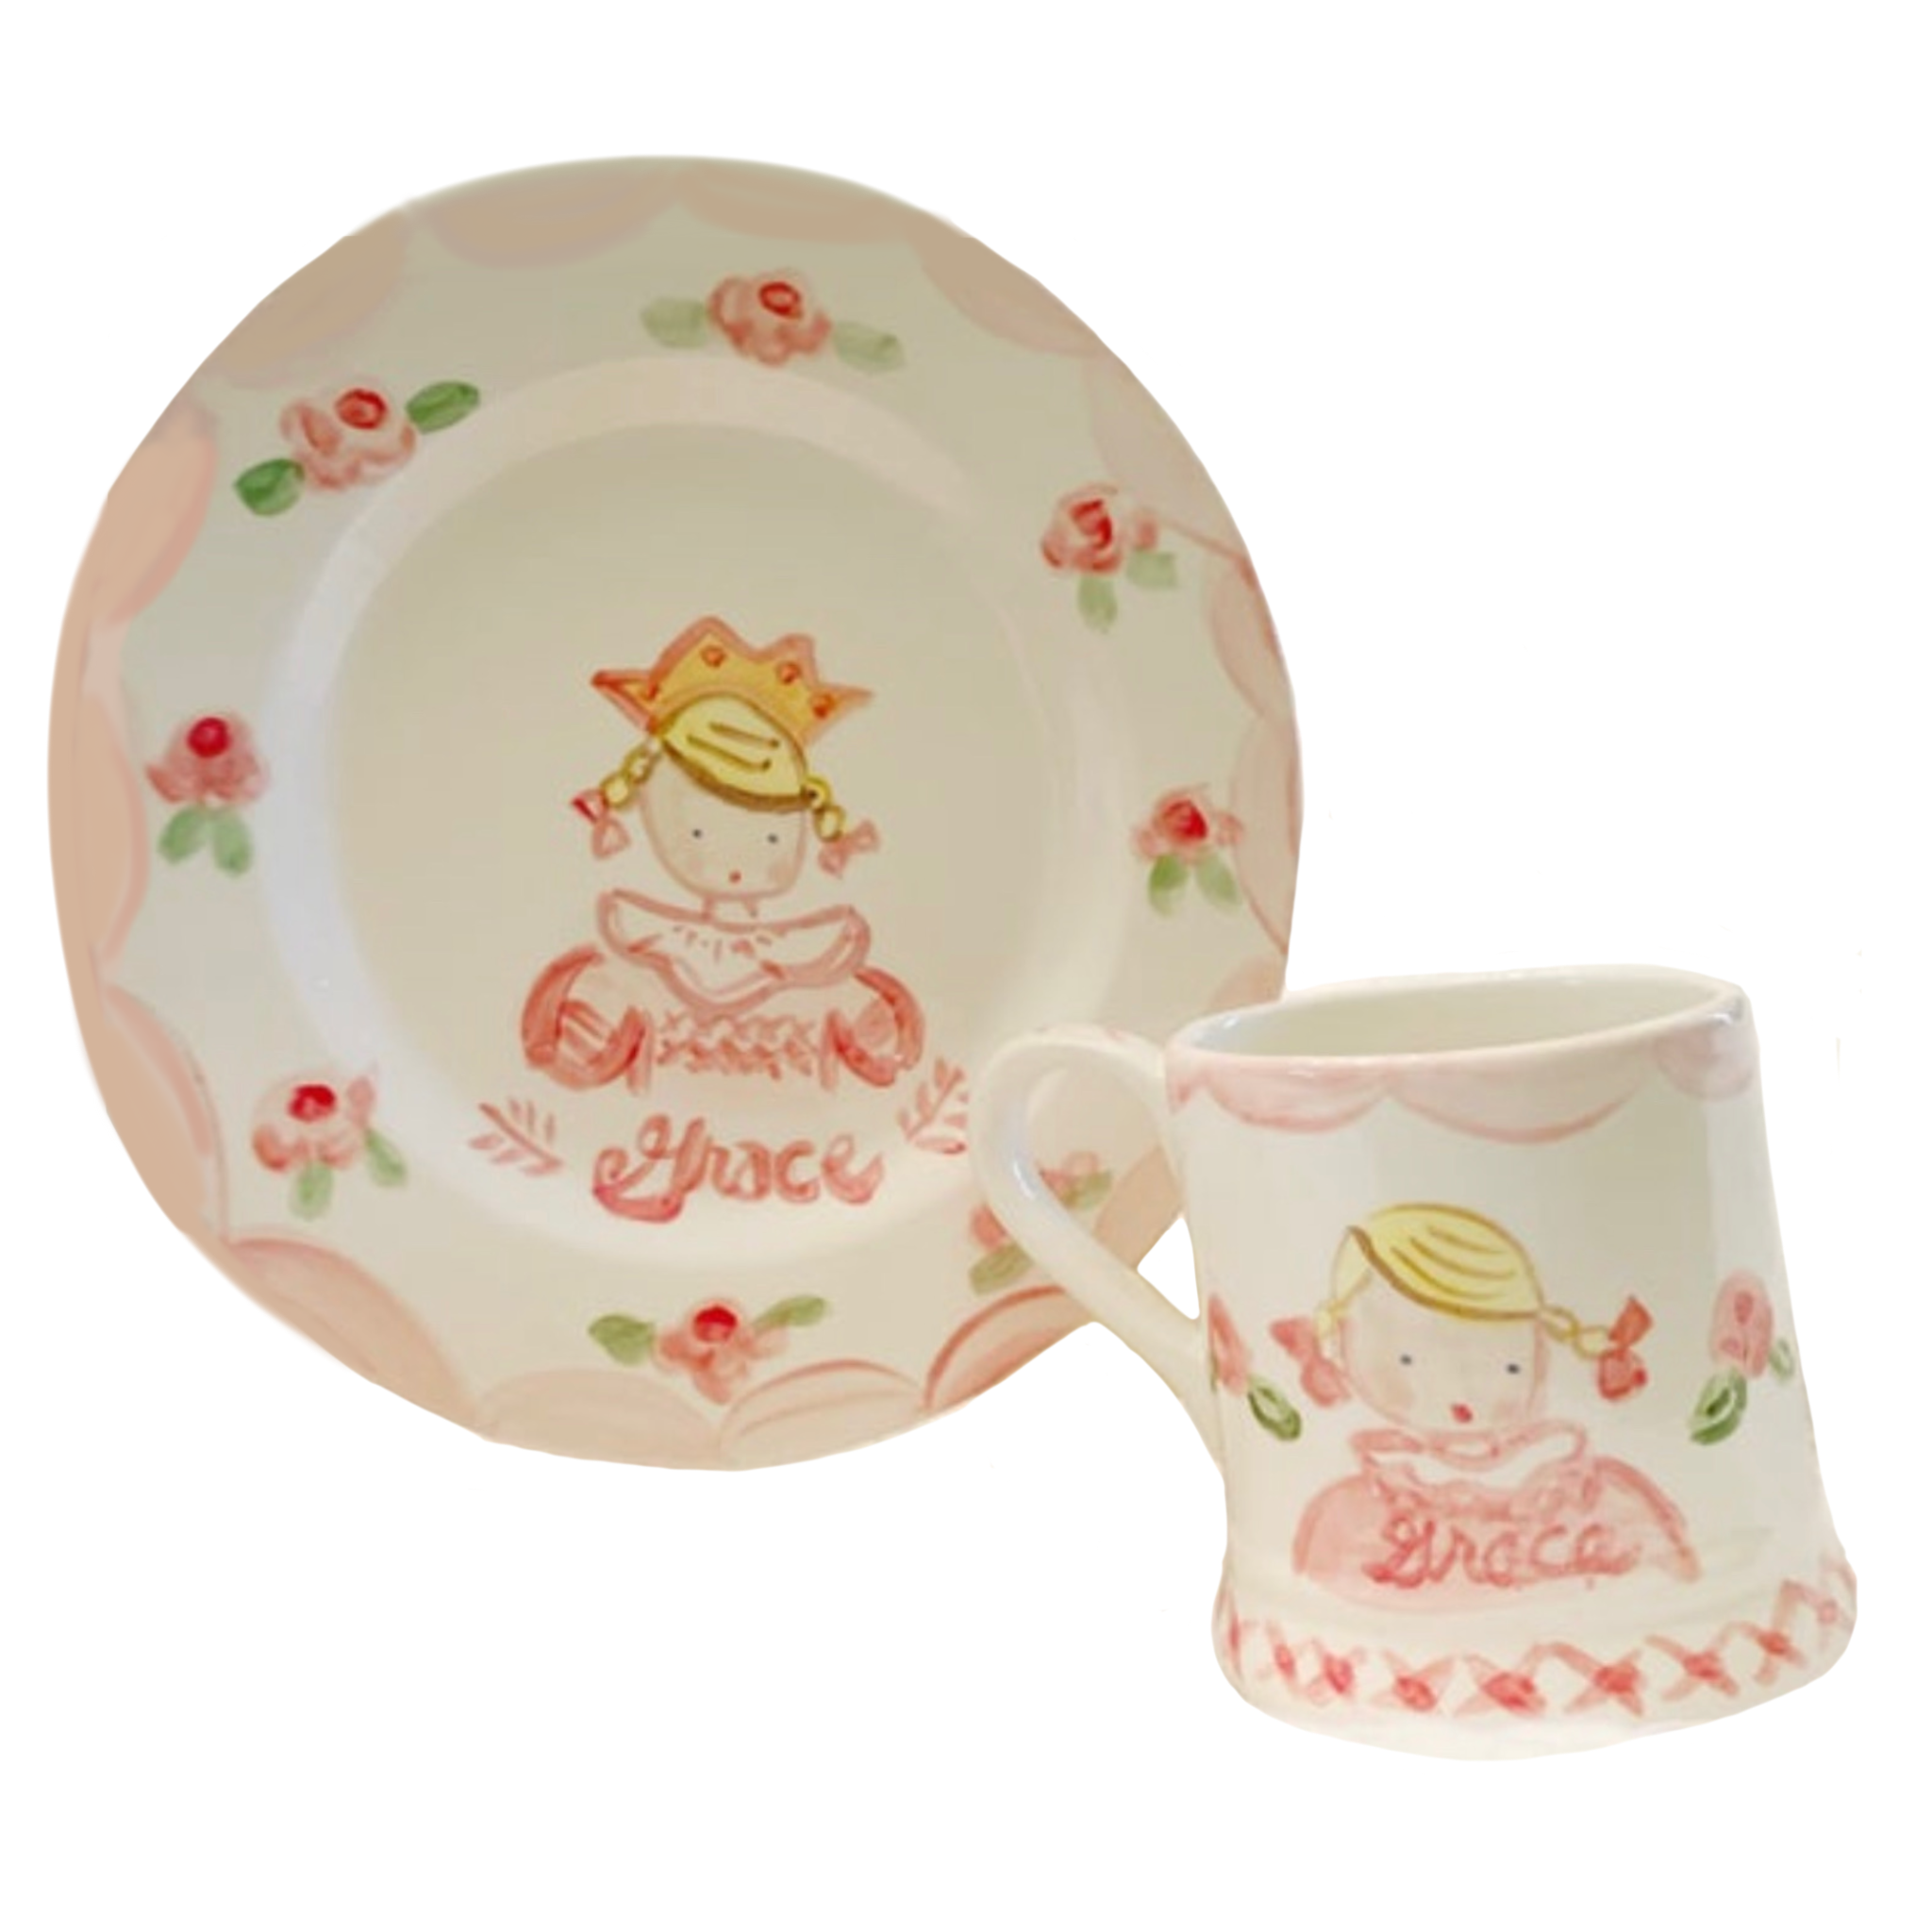 Child's Cup and Plate Set - Girl with Crown - Tricia Lowenfield Design